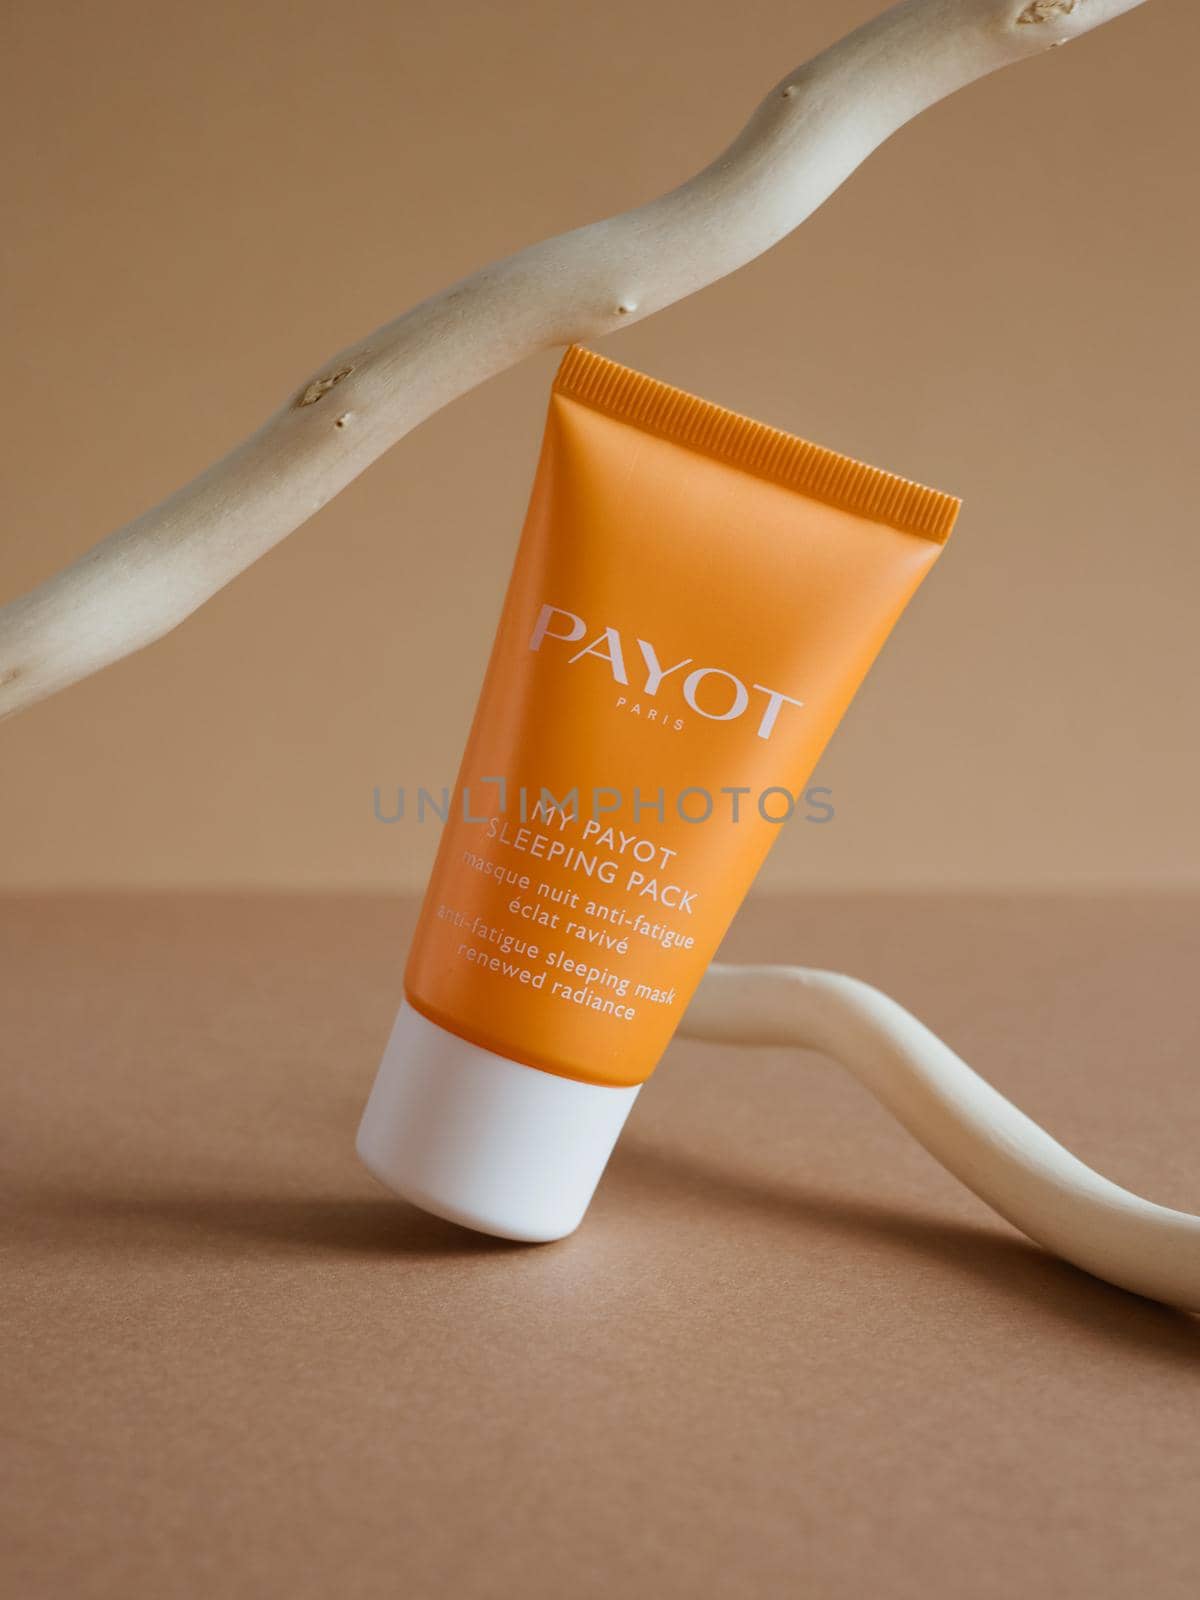 Moscow, Russia, 08.30.2021 Skin moisturizer cosmetic care night mask Payot with orange package on shiny beige background.  by katrinaera